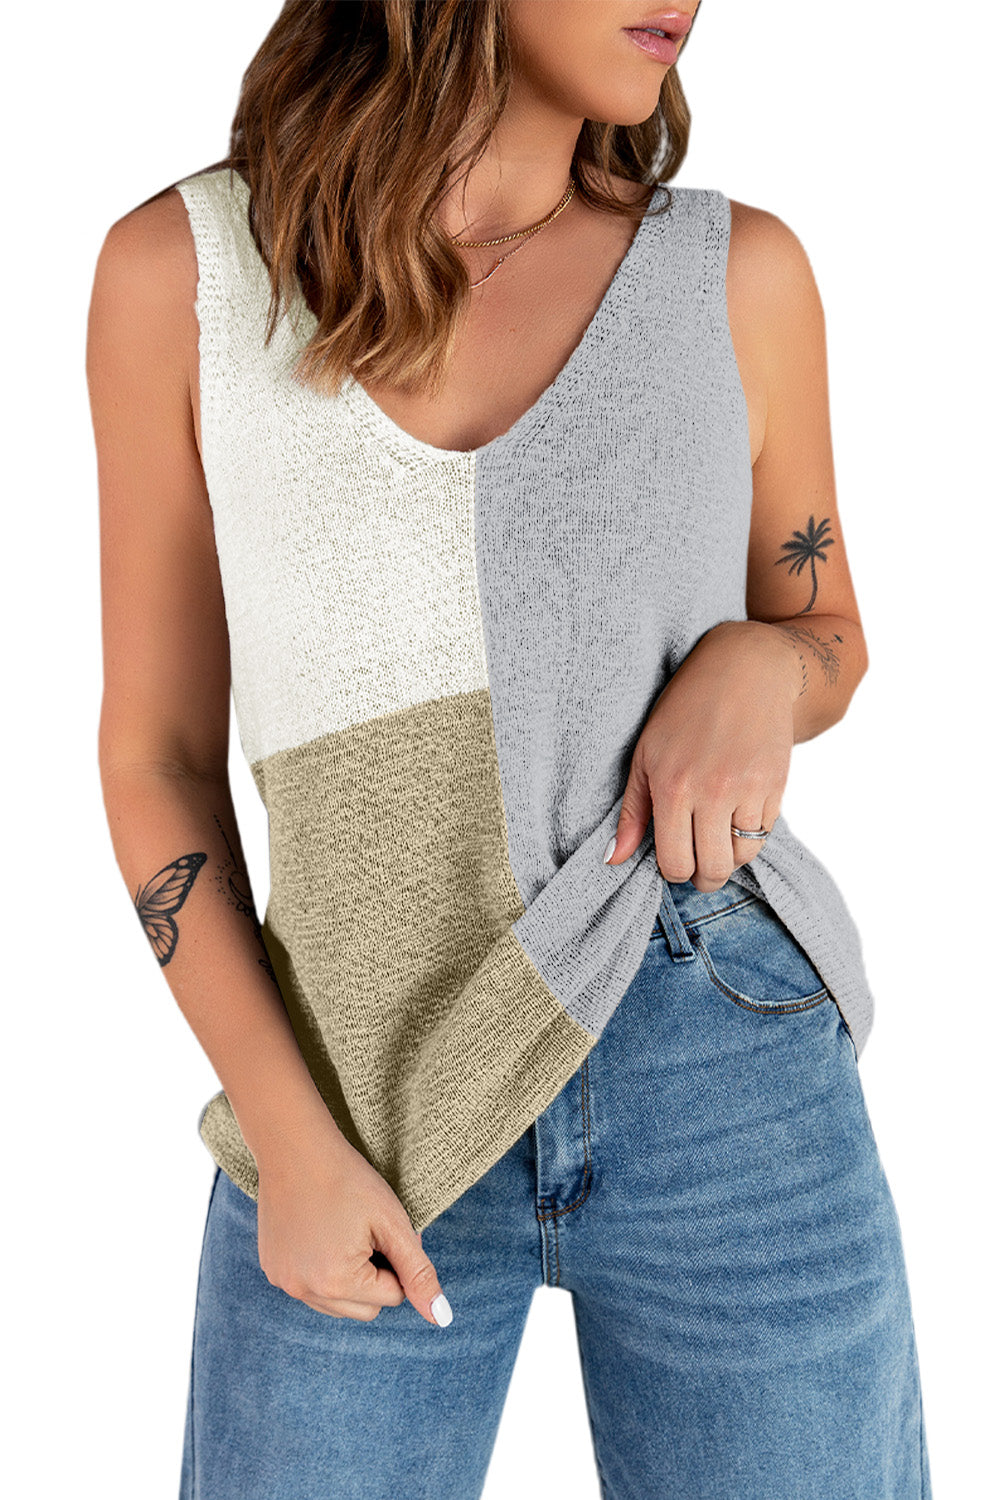 Gray Color Block Knitted Tank Top Tank Tops JT's Designer Fashion